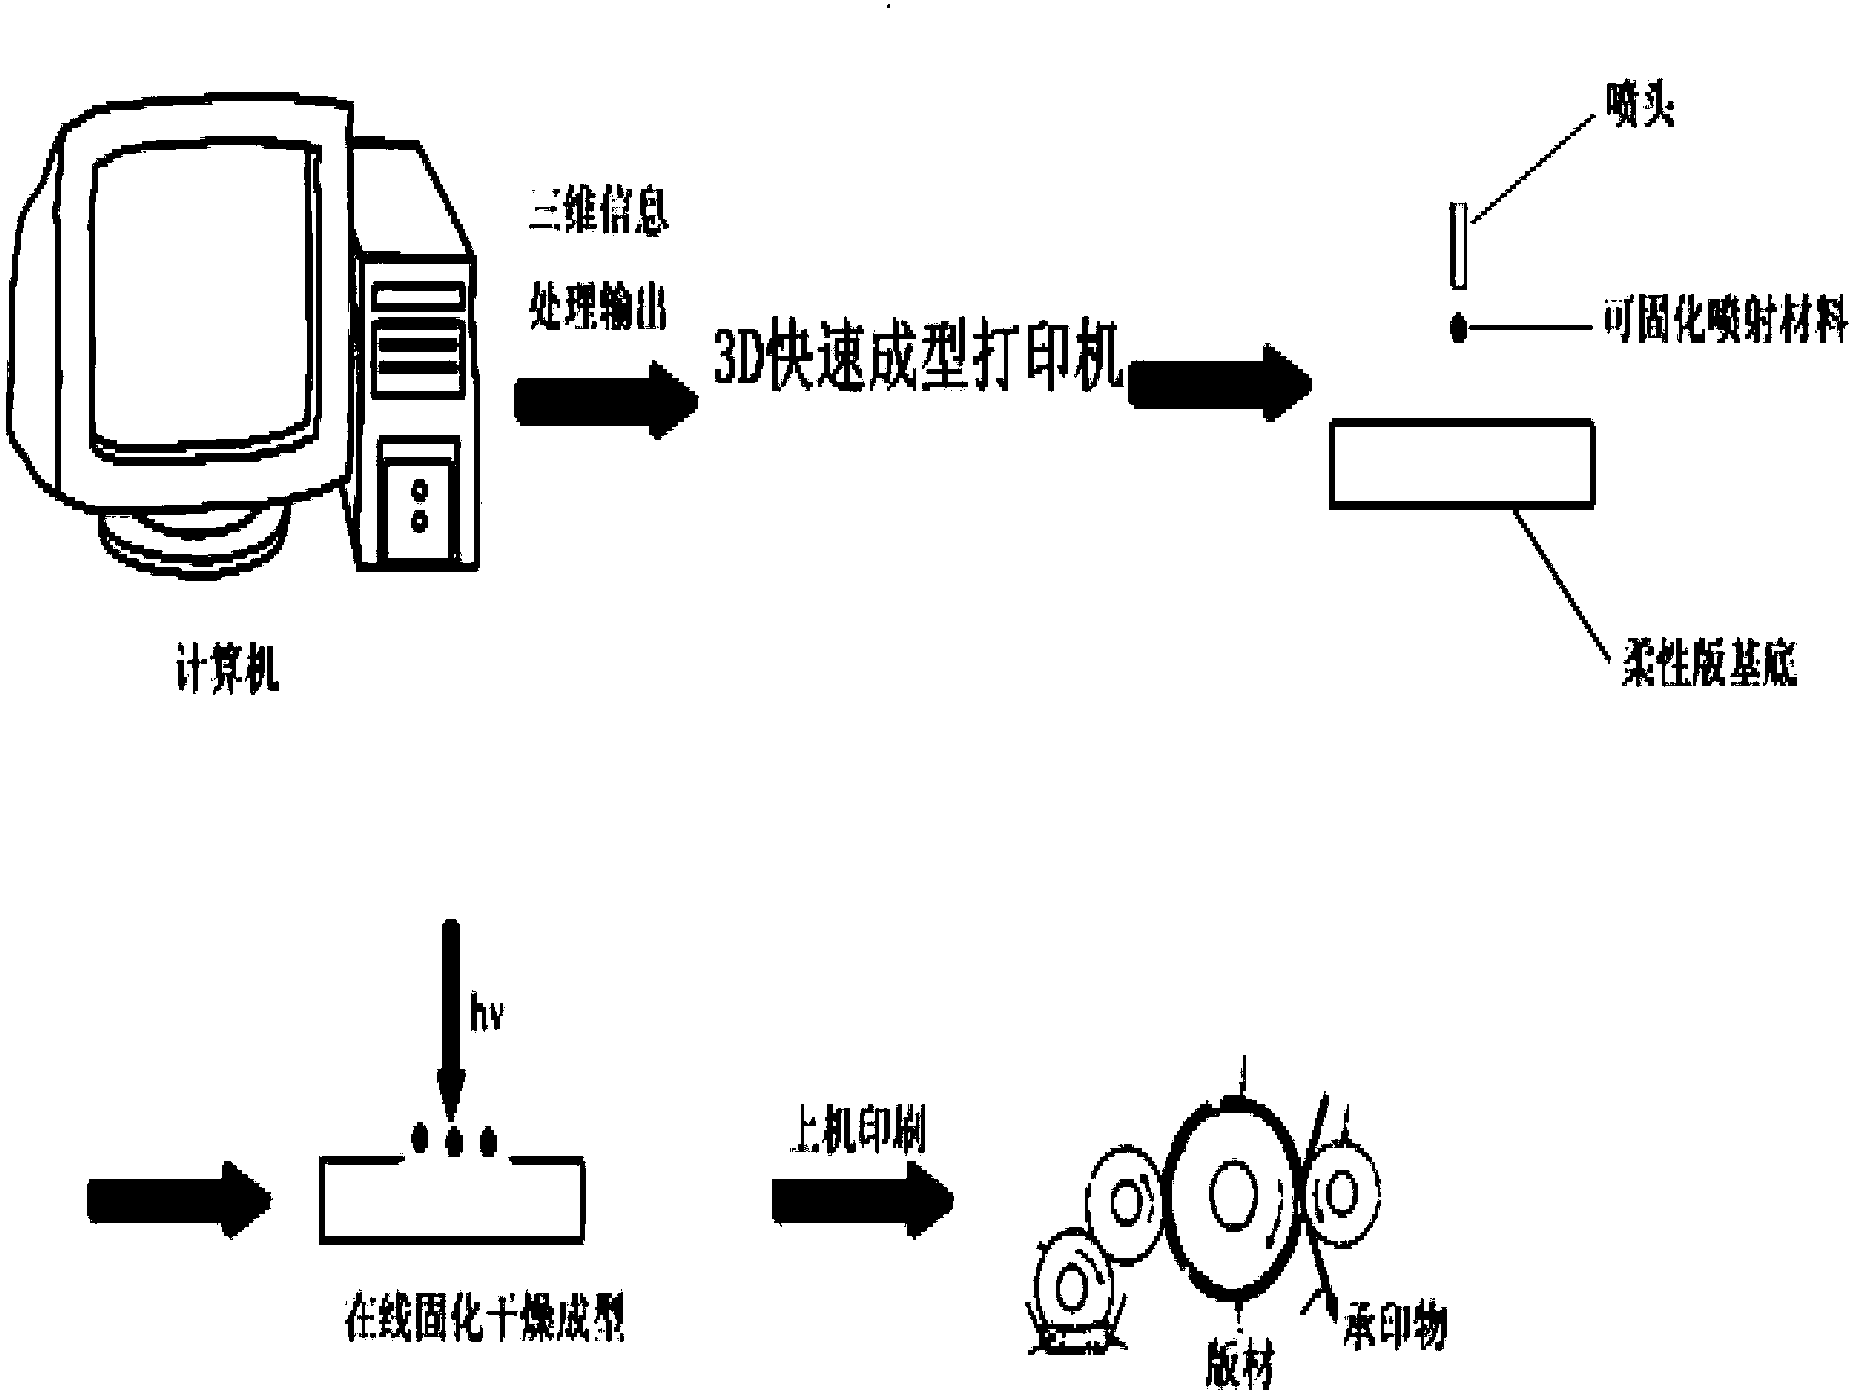 Flexographic plate CTP (computer to plate) direct printing method and equipment based on 3D rapid forming printing principle